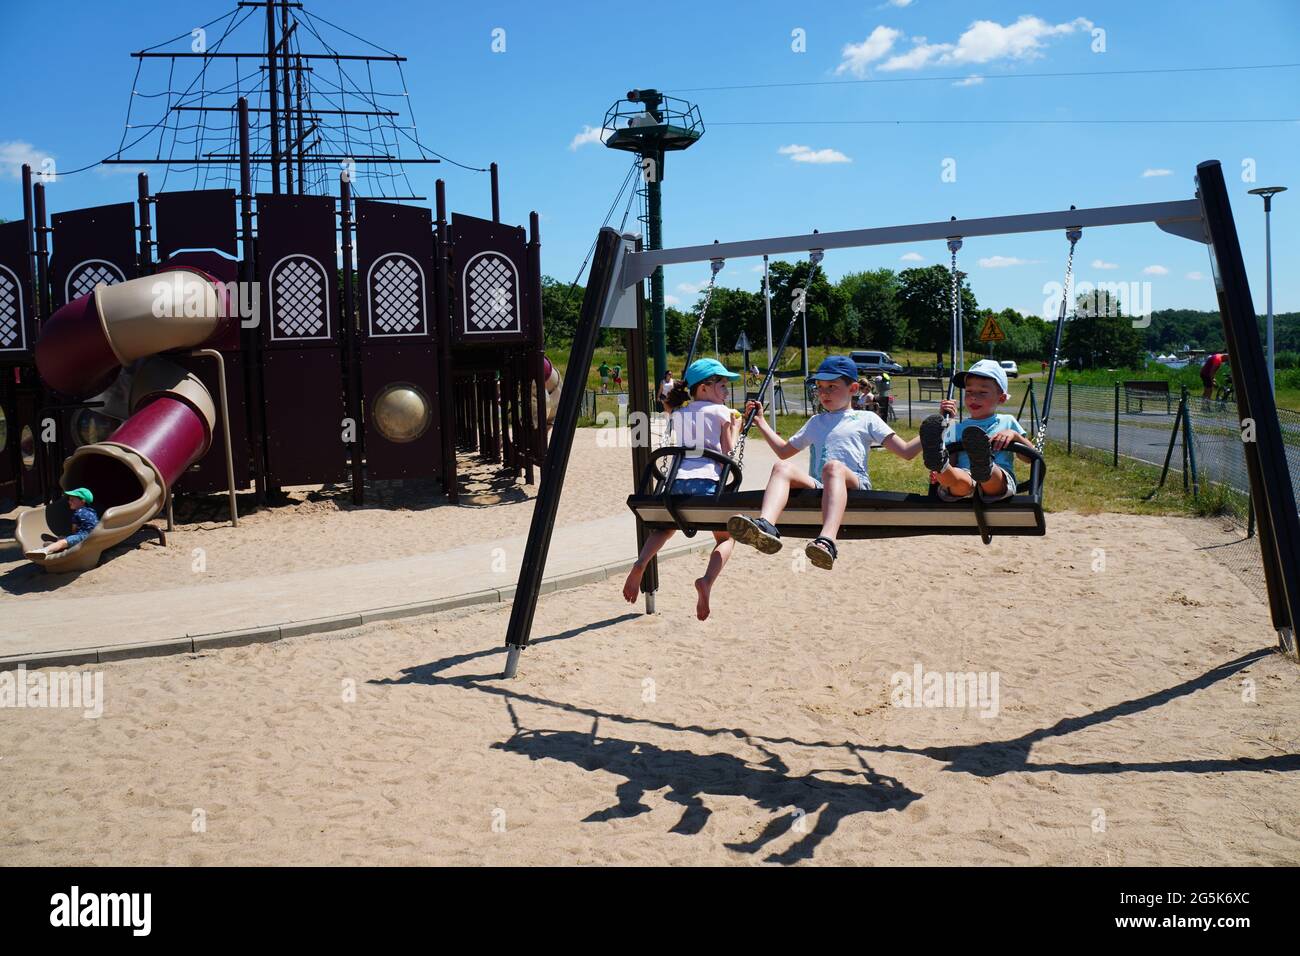 POZ, POLAND - Jun 27, 2021: Children sitting on a double seat swing set  equipment at a playground in the Malta park on a sunny day Stock Photo -  Alamy